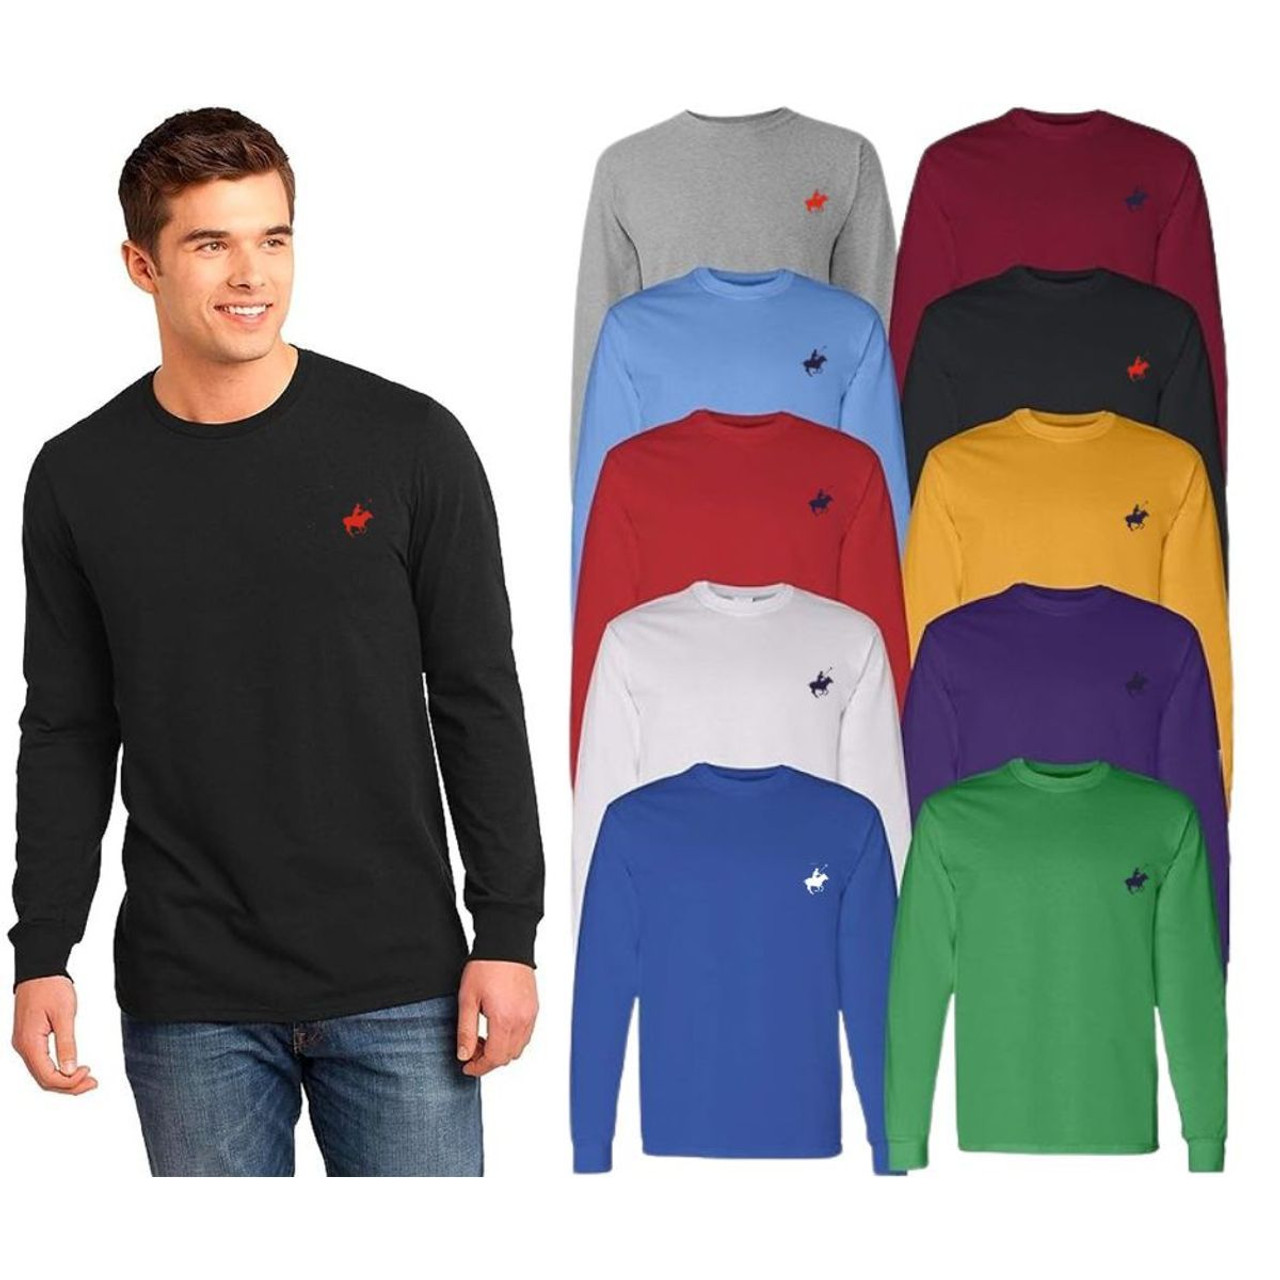 Pacific Polo Club Men's Cotton Long Sleeve T-Shirts (4-Pack) product image